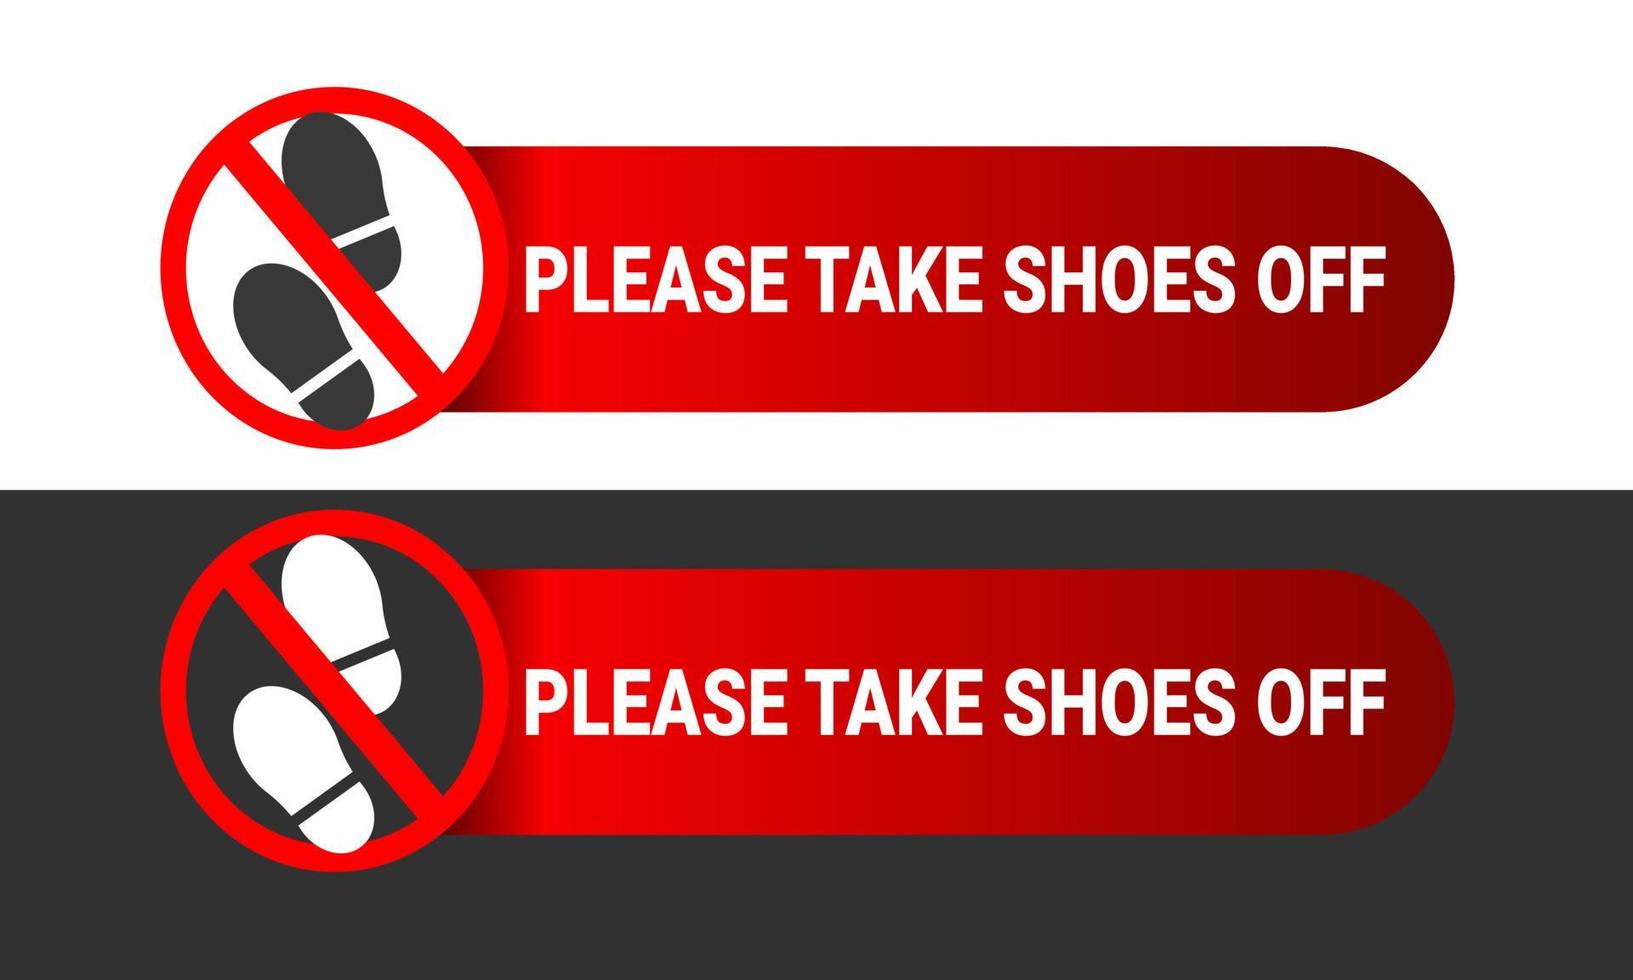 please take shoes off sign with footprints silhouette illustration for printable red label sticker. forbidden sign vector